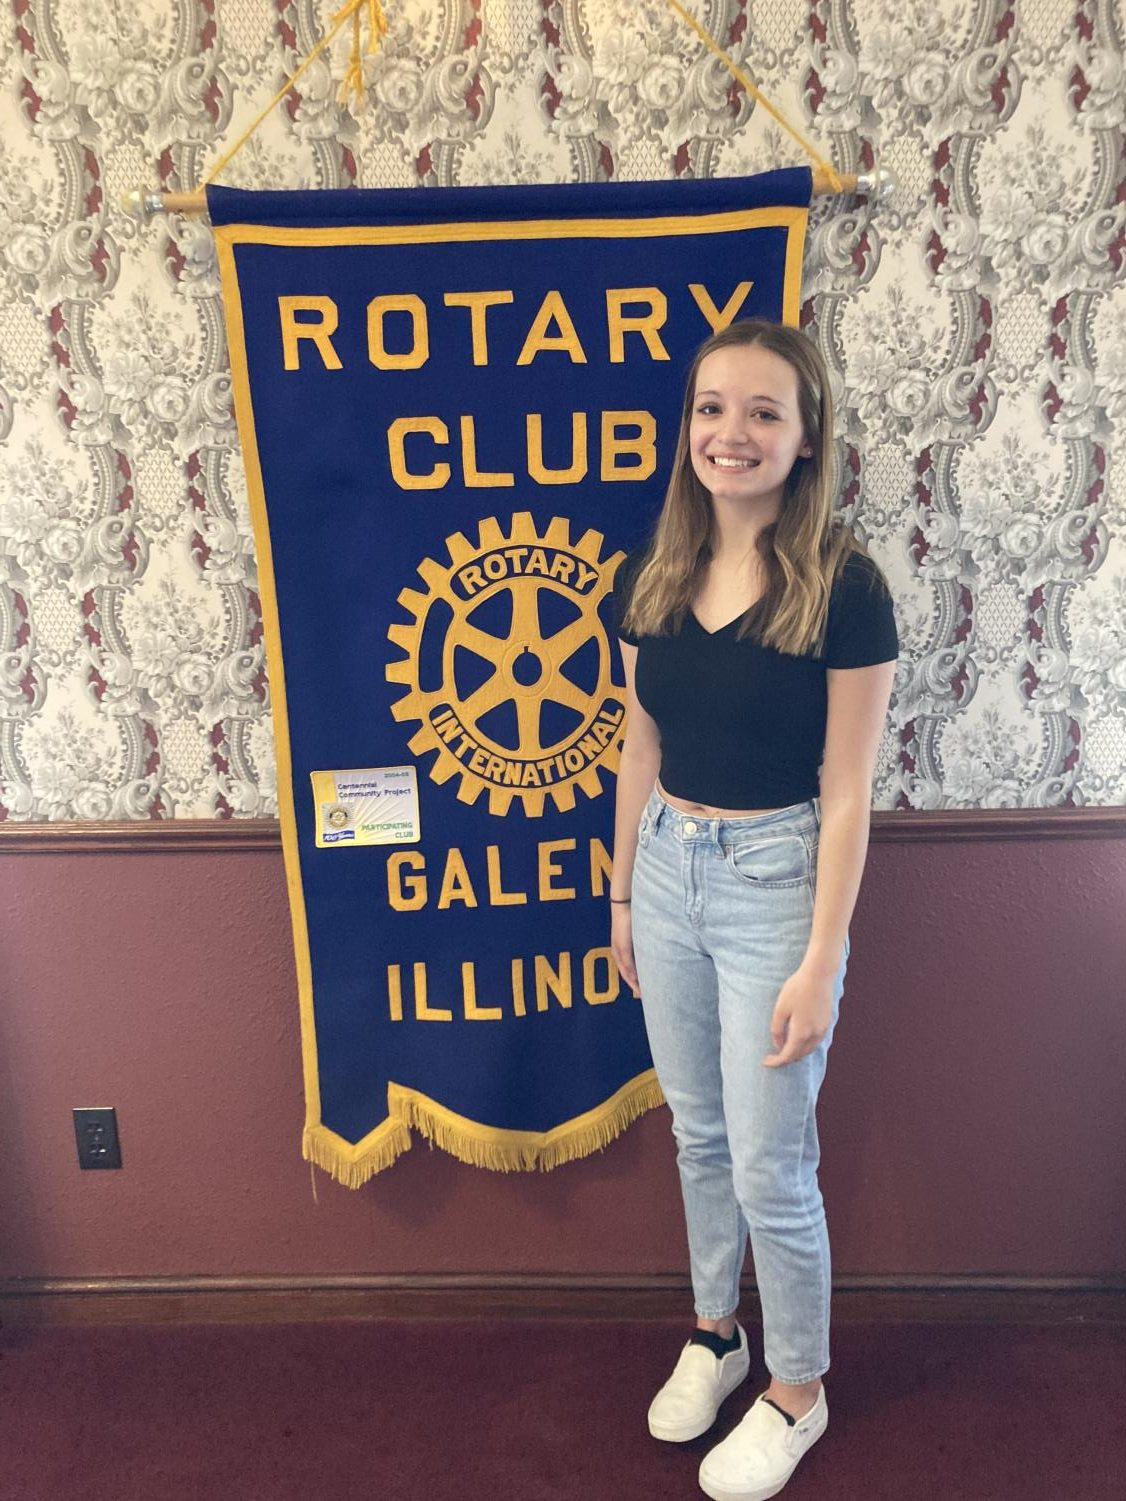 Lilly Potter is shown smiling for a picture at the DeSoto House Hotel after winning Rotary Student of the Quarter. Every teacher thinks she is a delight in their classrooms. “I was so excited to win this award because it’s showing people how much hard work I put into this last quarter,” said Potter. “I hope this inspires others to work hard because winning this award is an honor.”